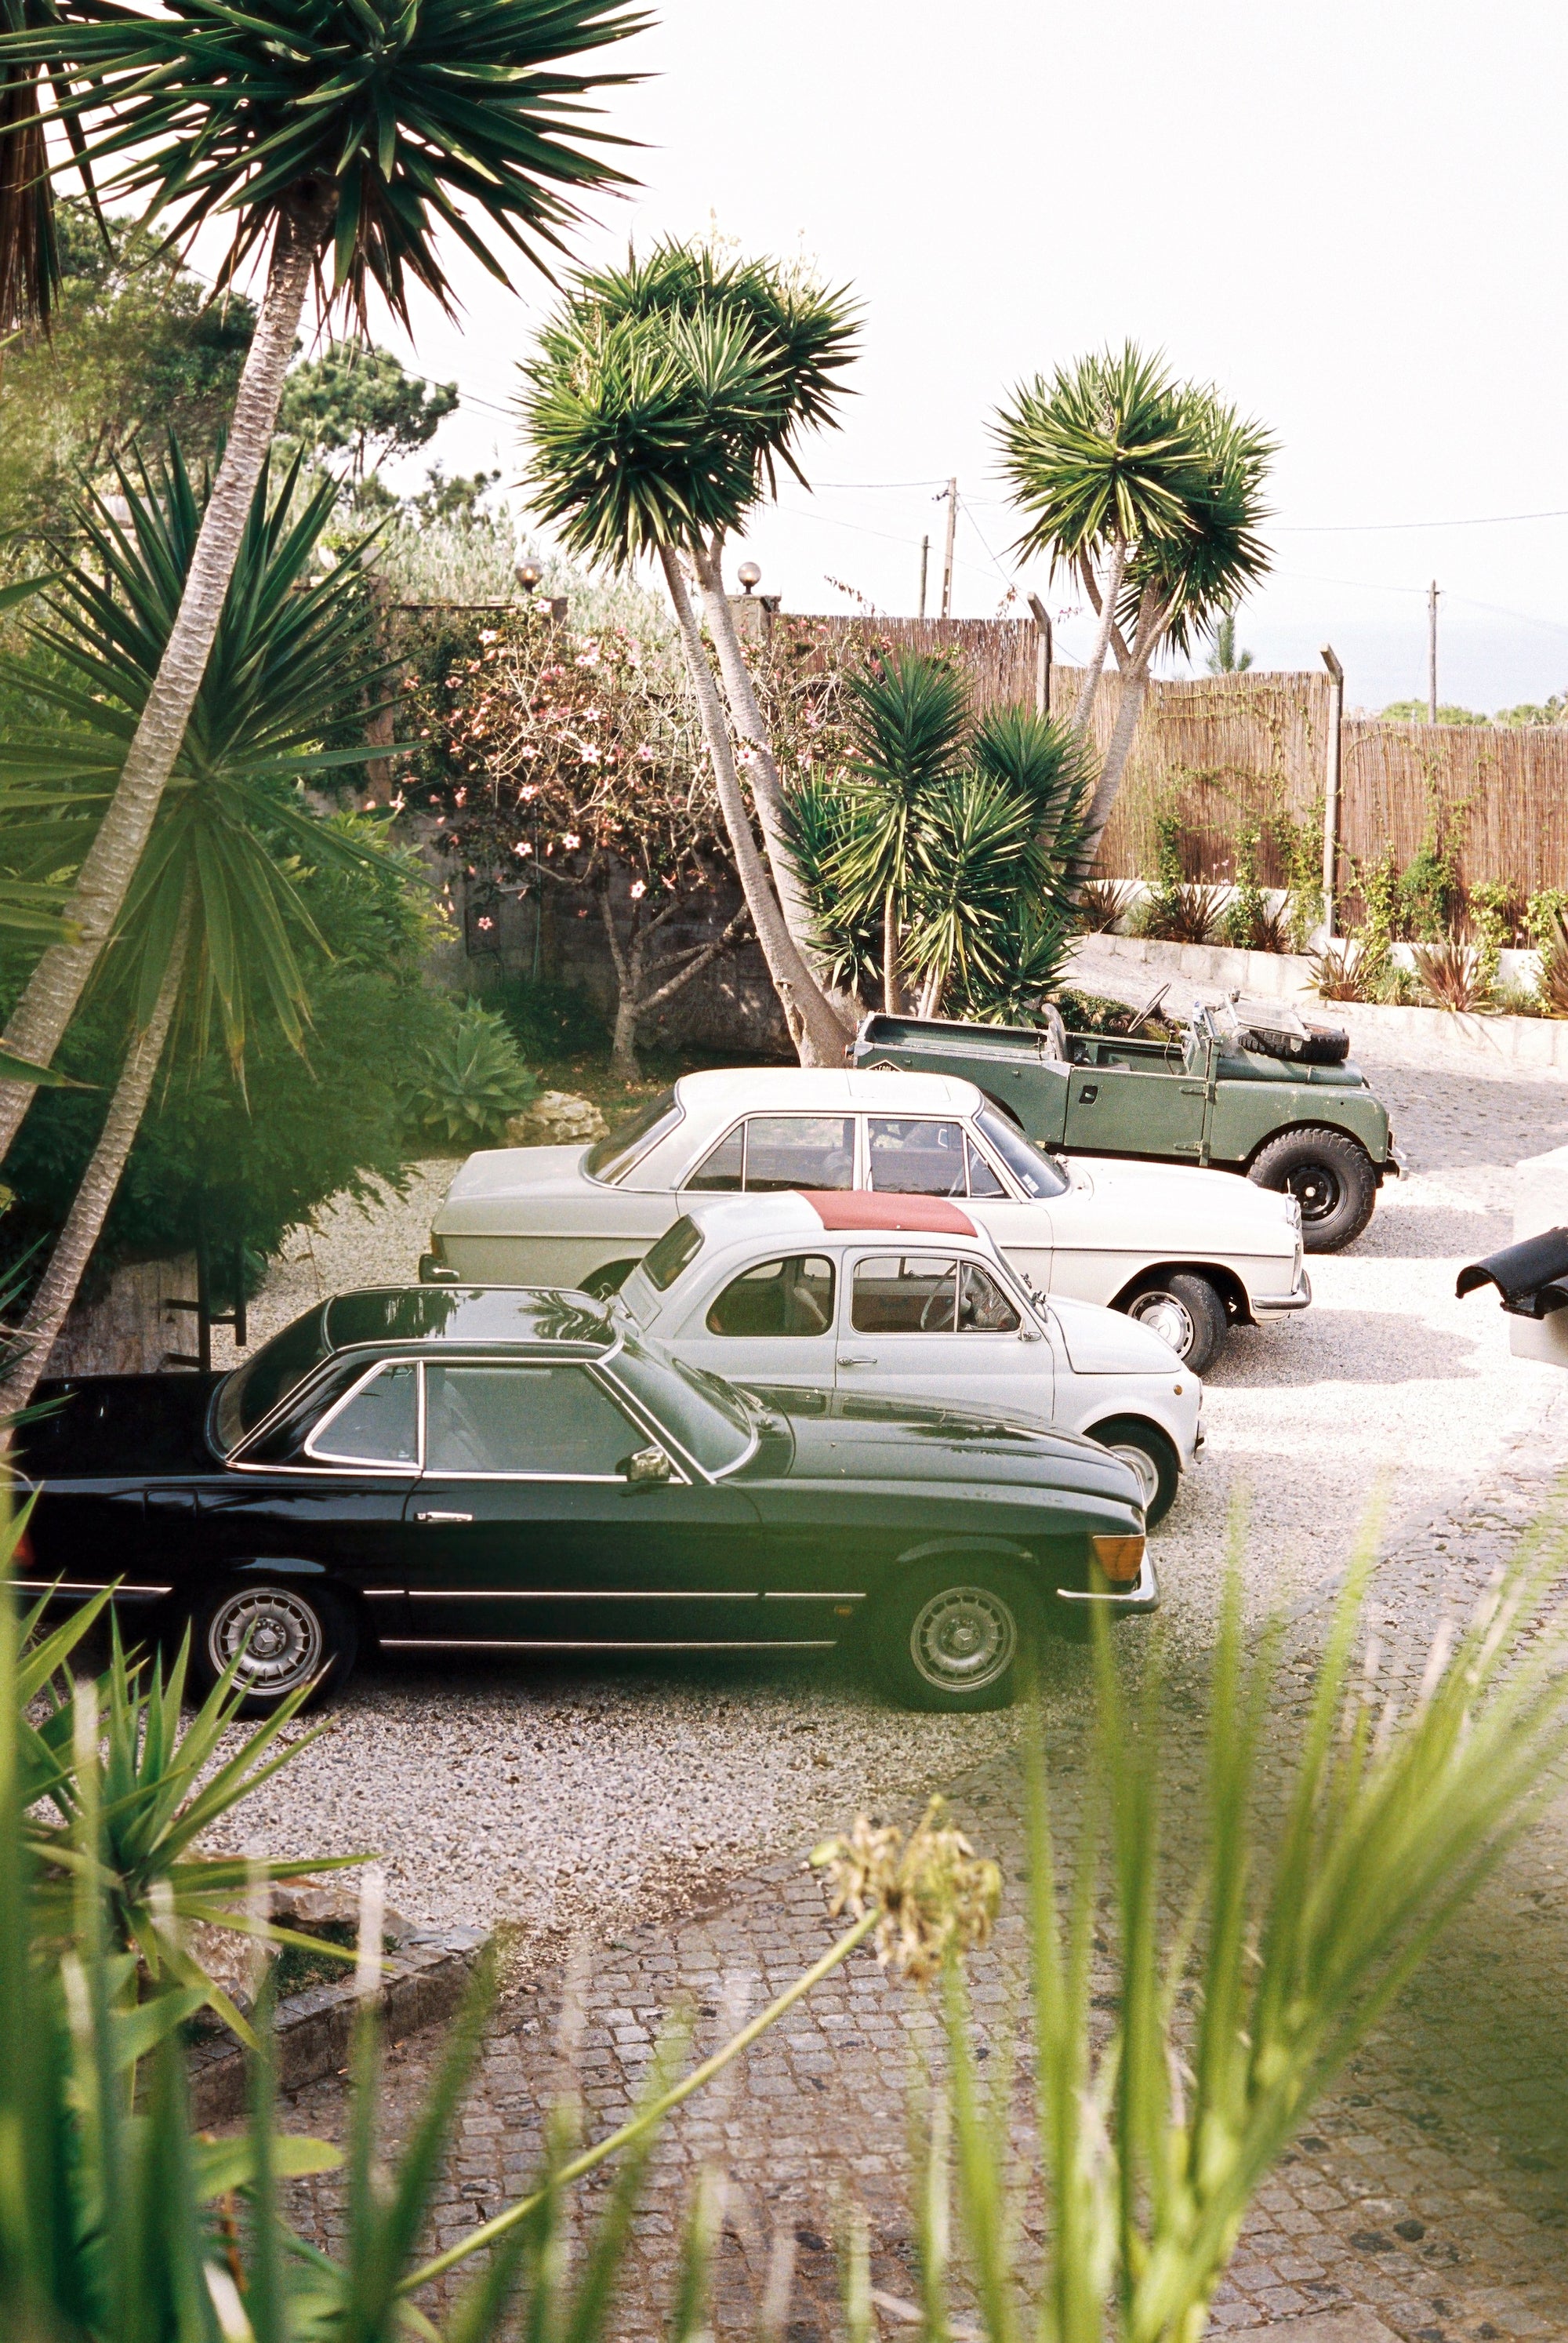 A photo showing 4 vintage cars parked outside the Marqí Hotel